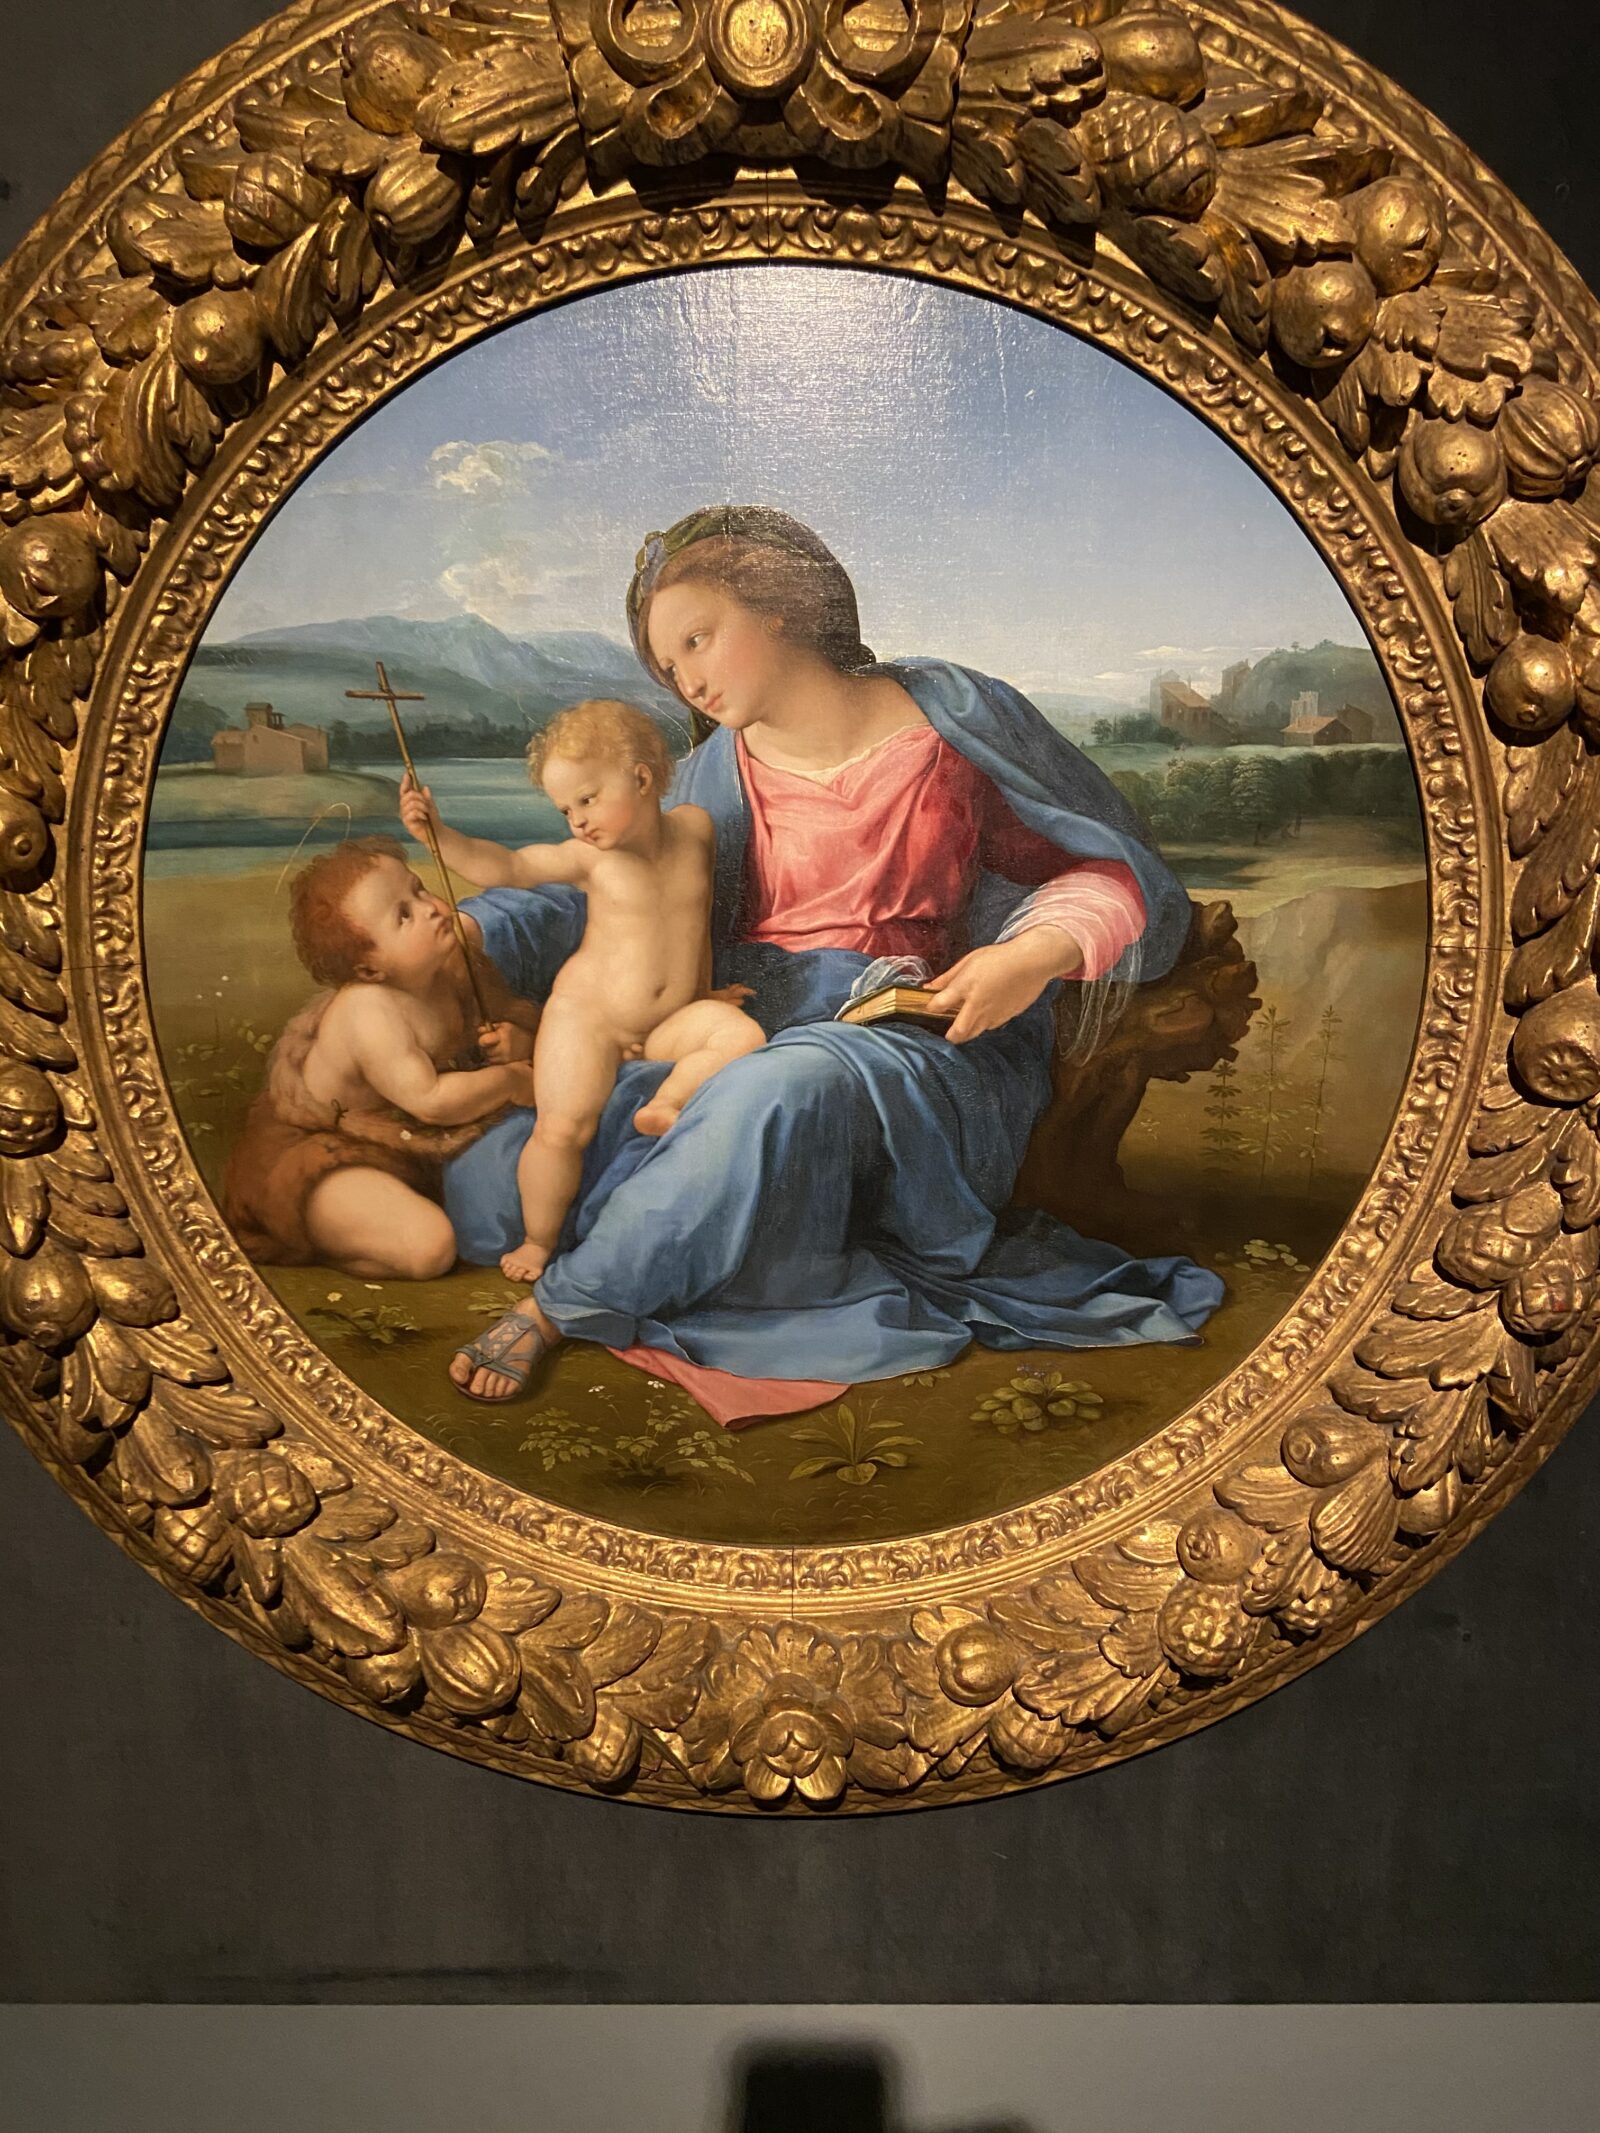 Raphael Exhibition A Great Tour Of A Grand Artist As Italy Opens Back